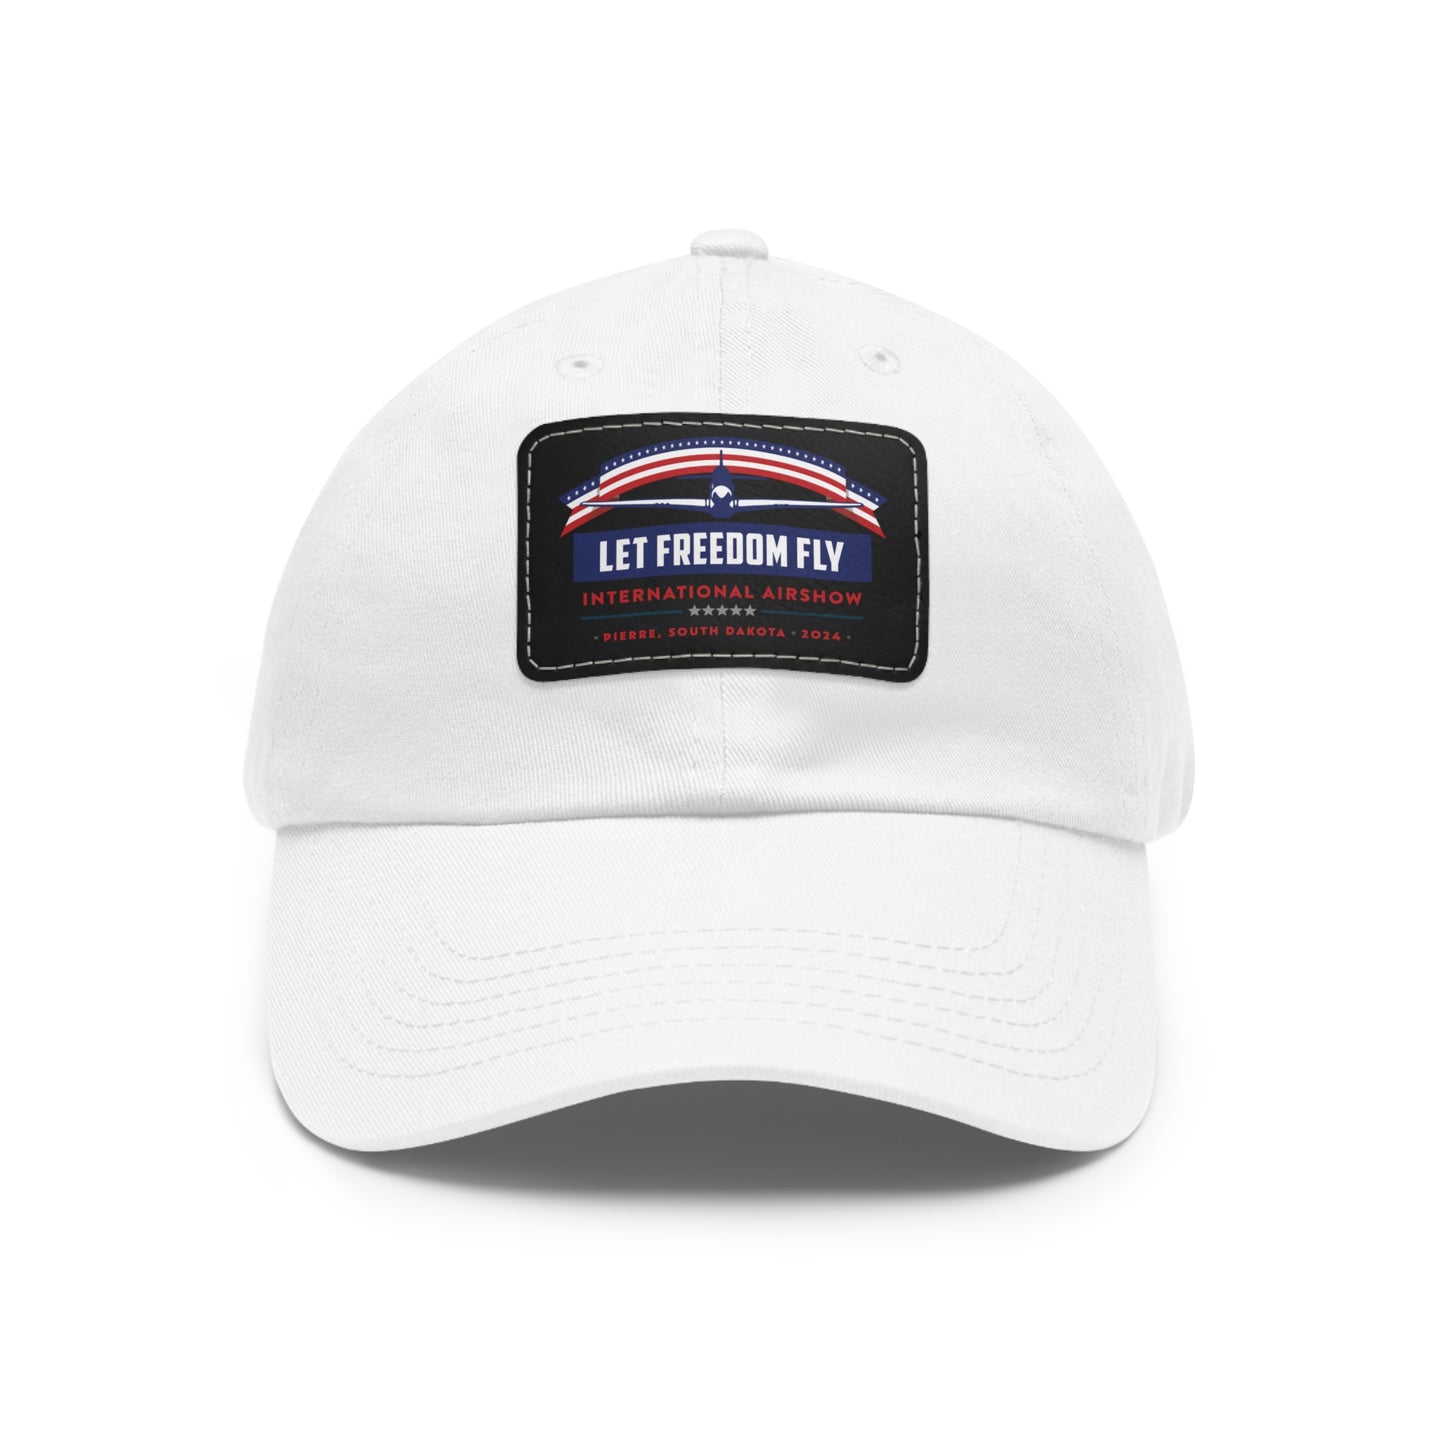 Let Freedom Fly International Airshow Dad Hat with Leather Patch (Rectangle)